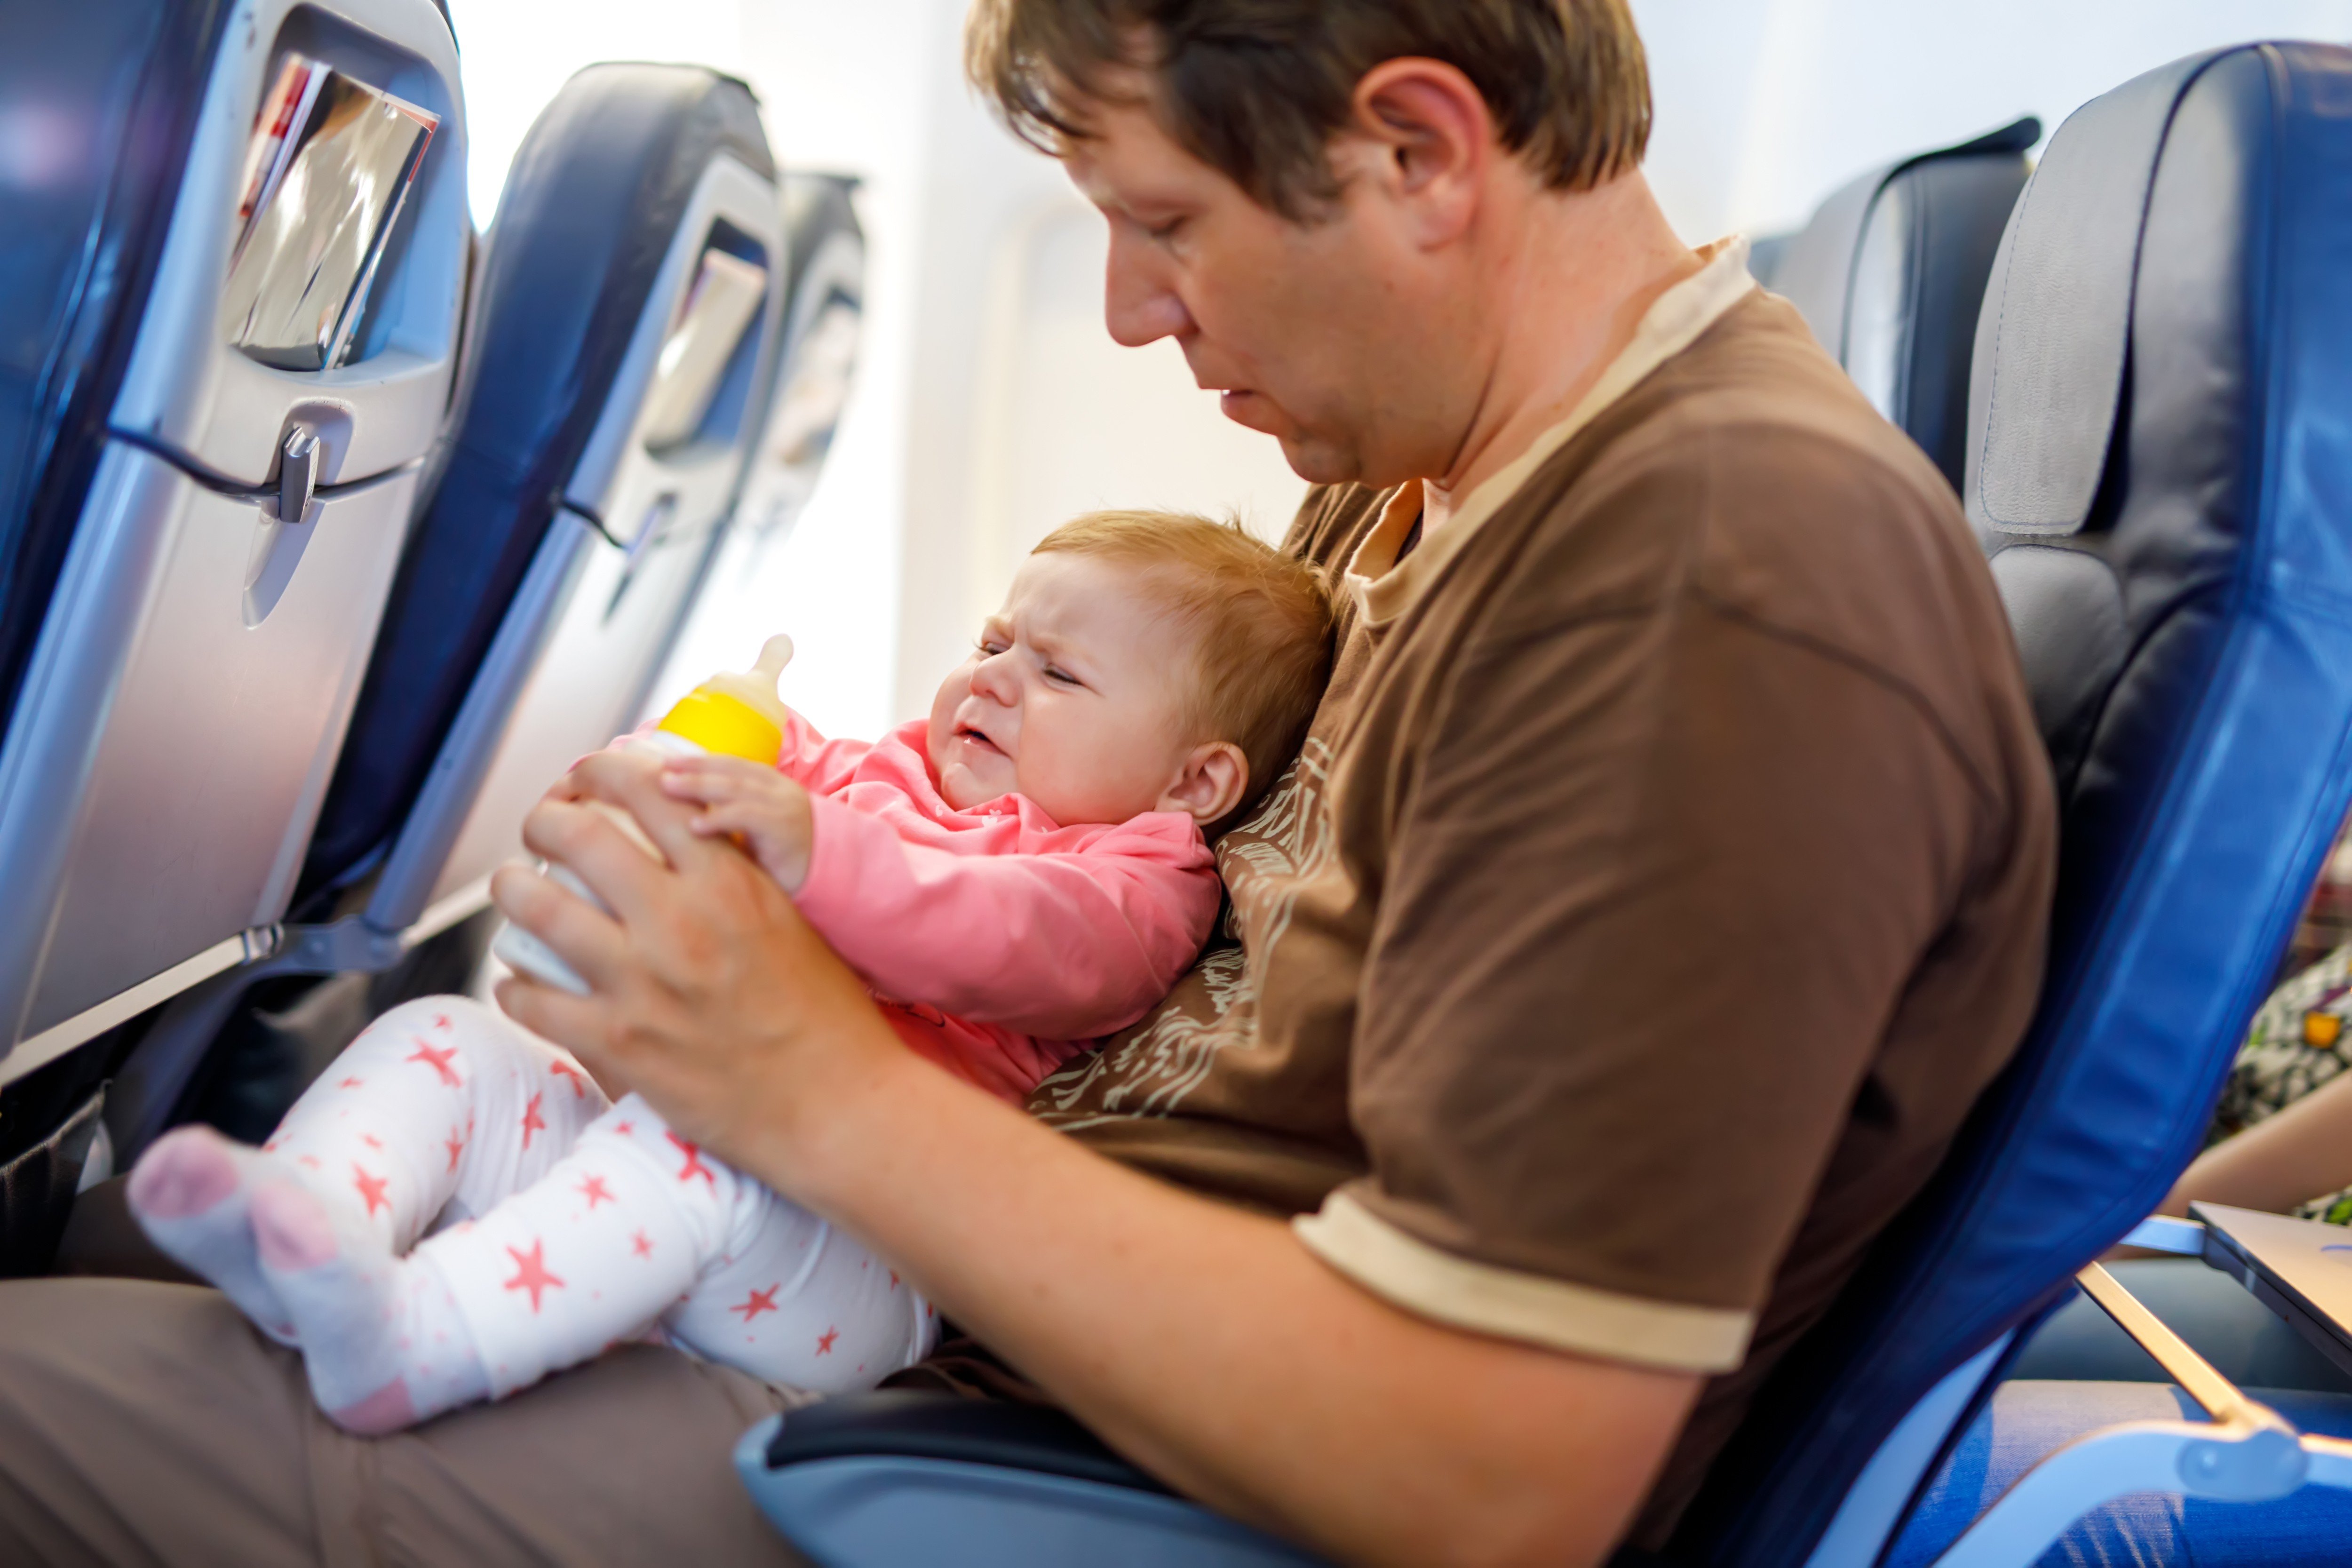 A father holds his daughter during a flight. Photo: Handout